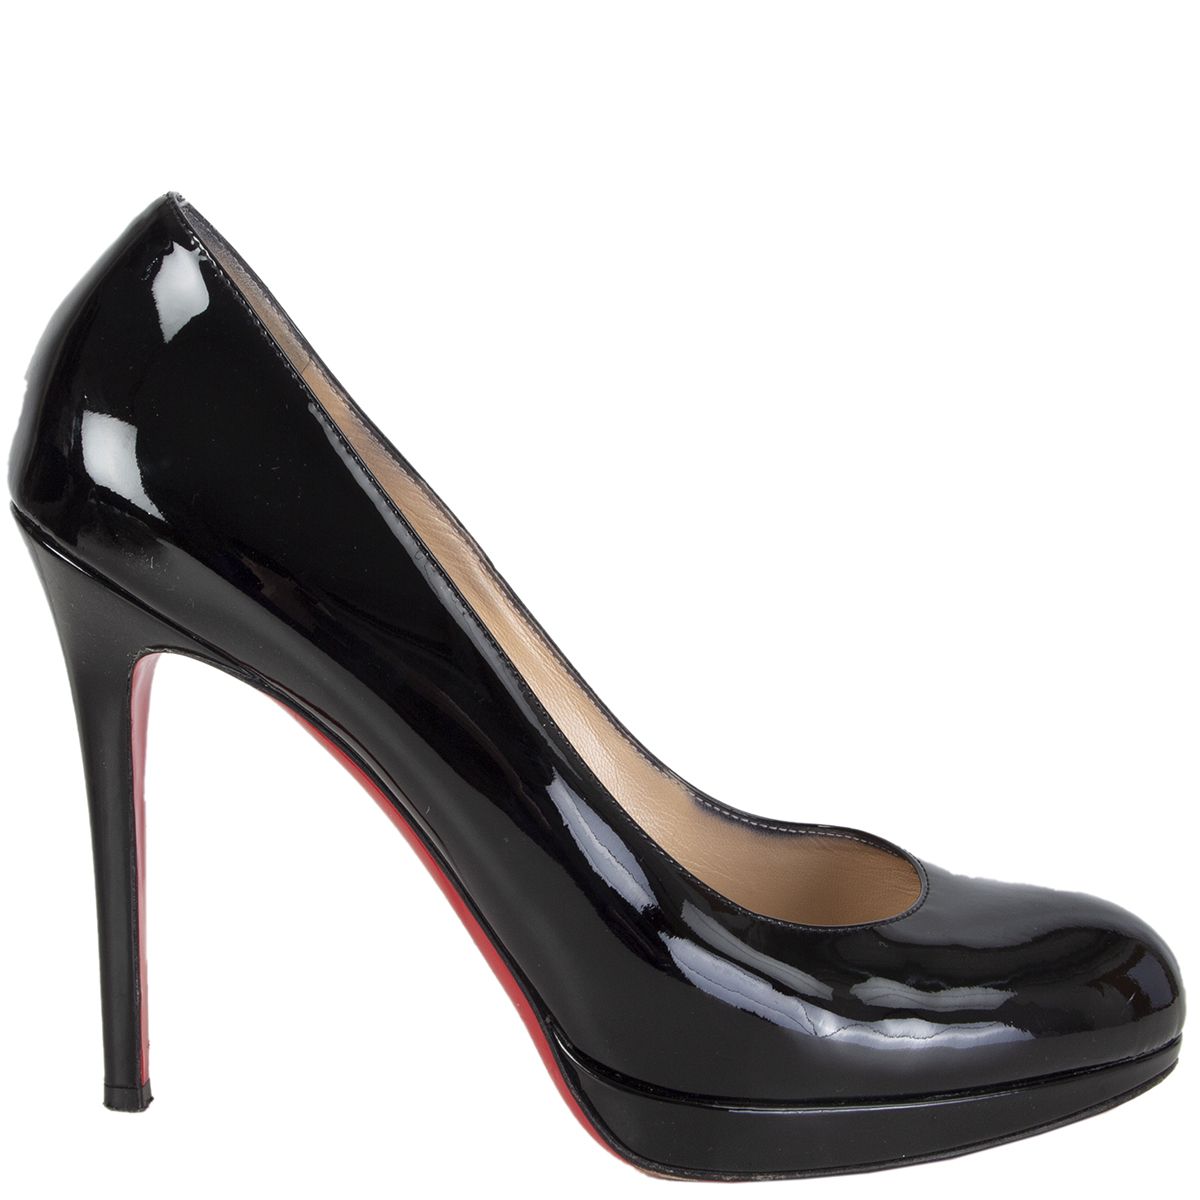 louboutin patent leather pumps